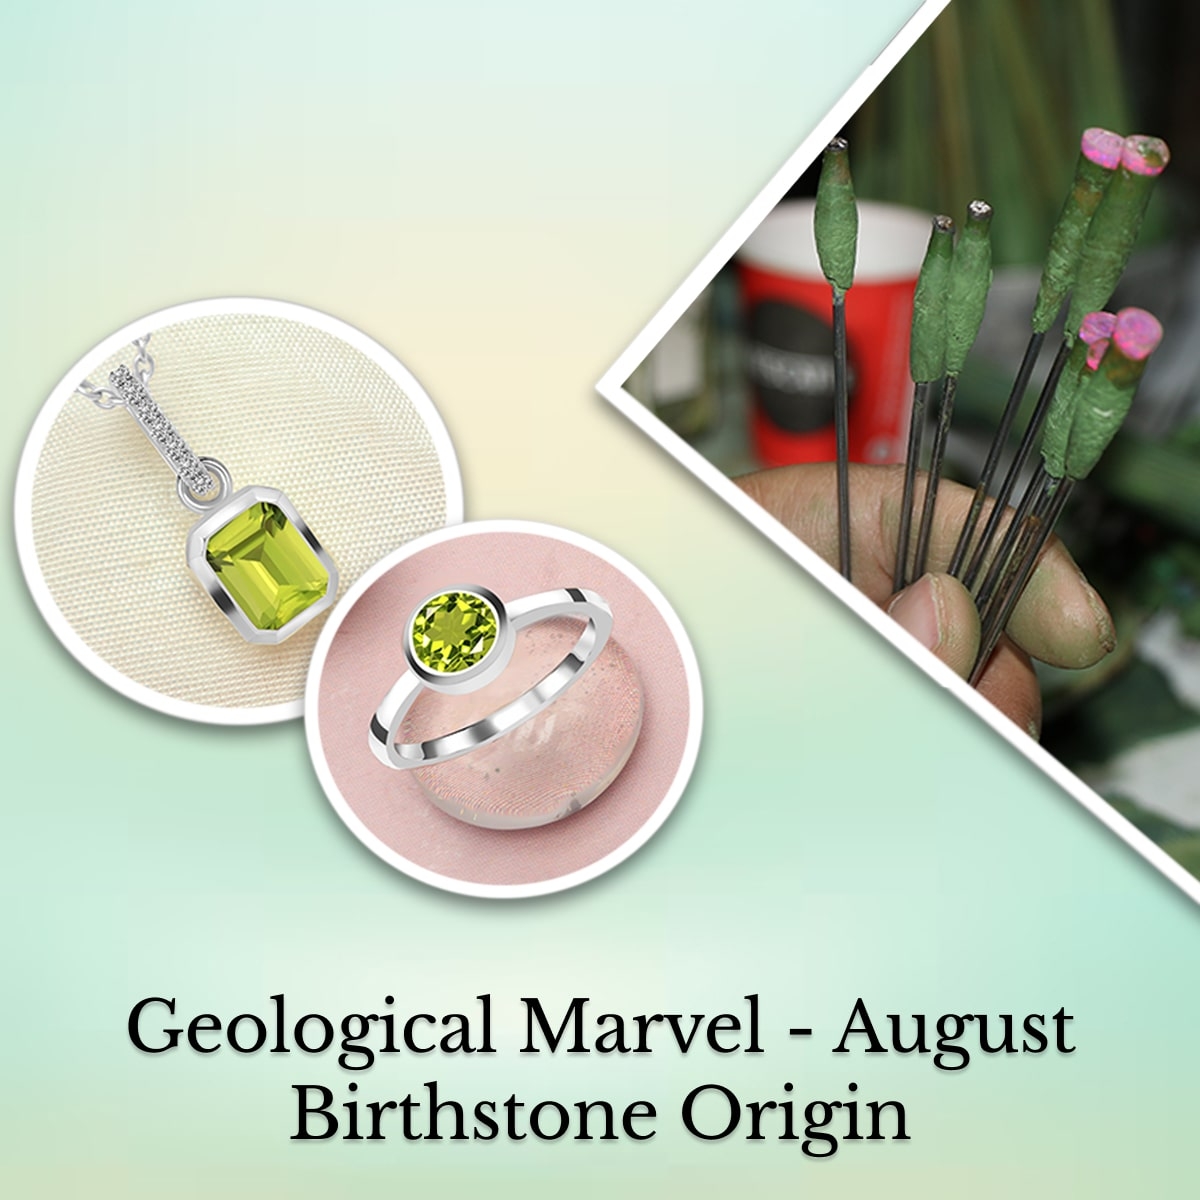 The Origin of the August Birthstone